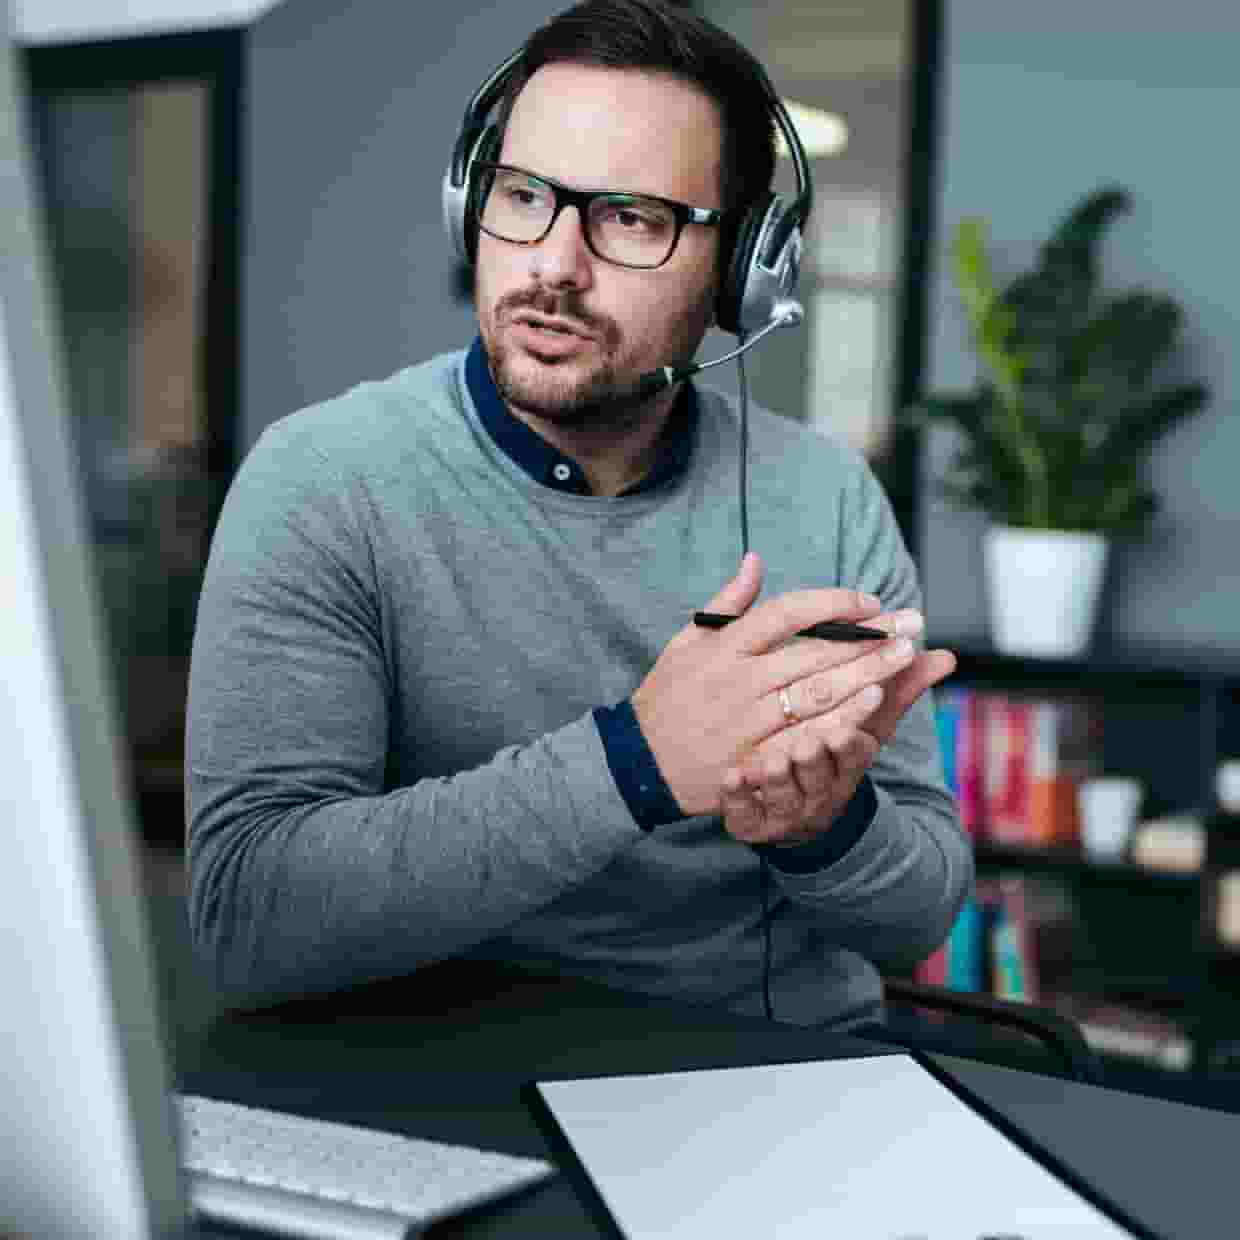 A man in an office wearing a headset and working at computer.